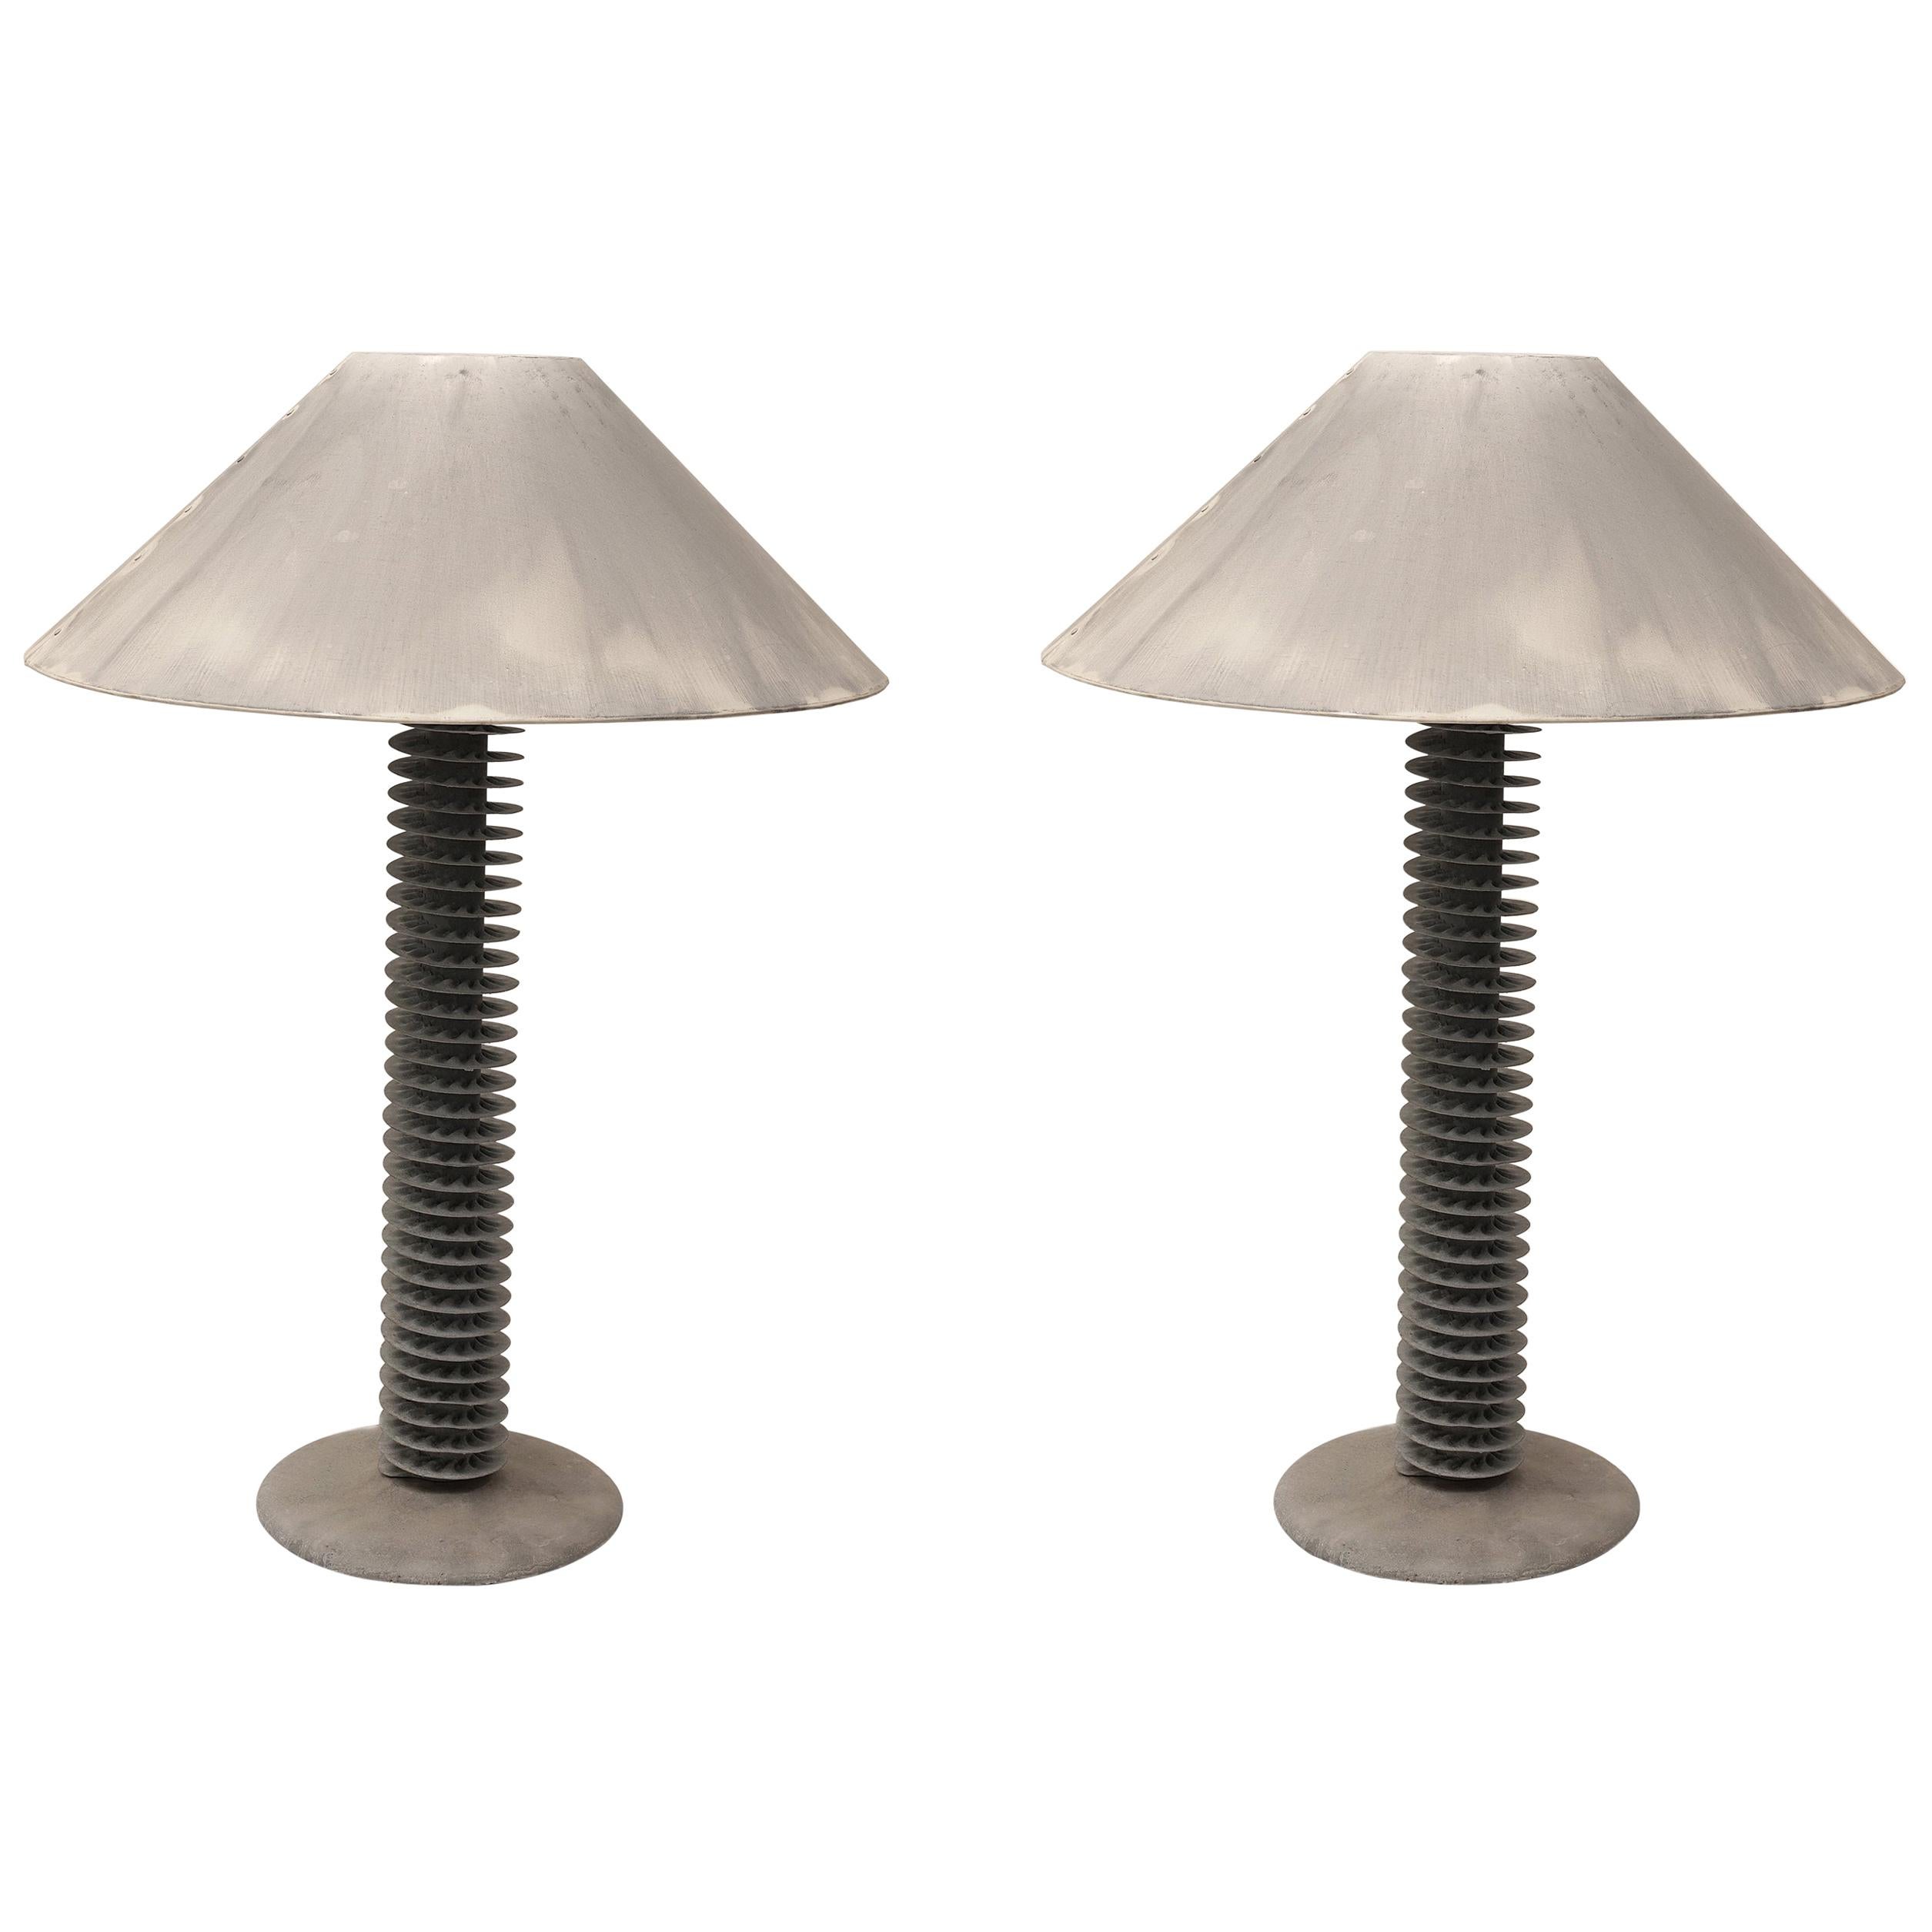 Pair of Gray Metal and Cast Stone Table Lamps, American